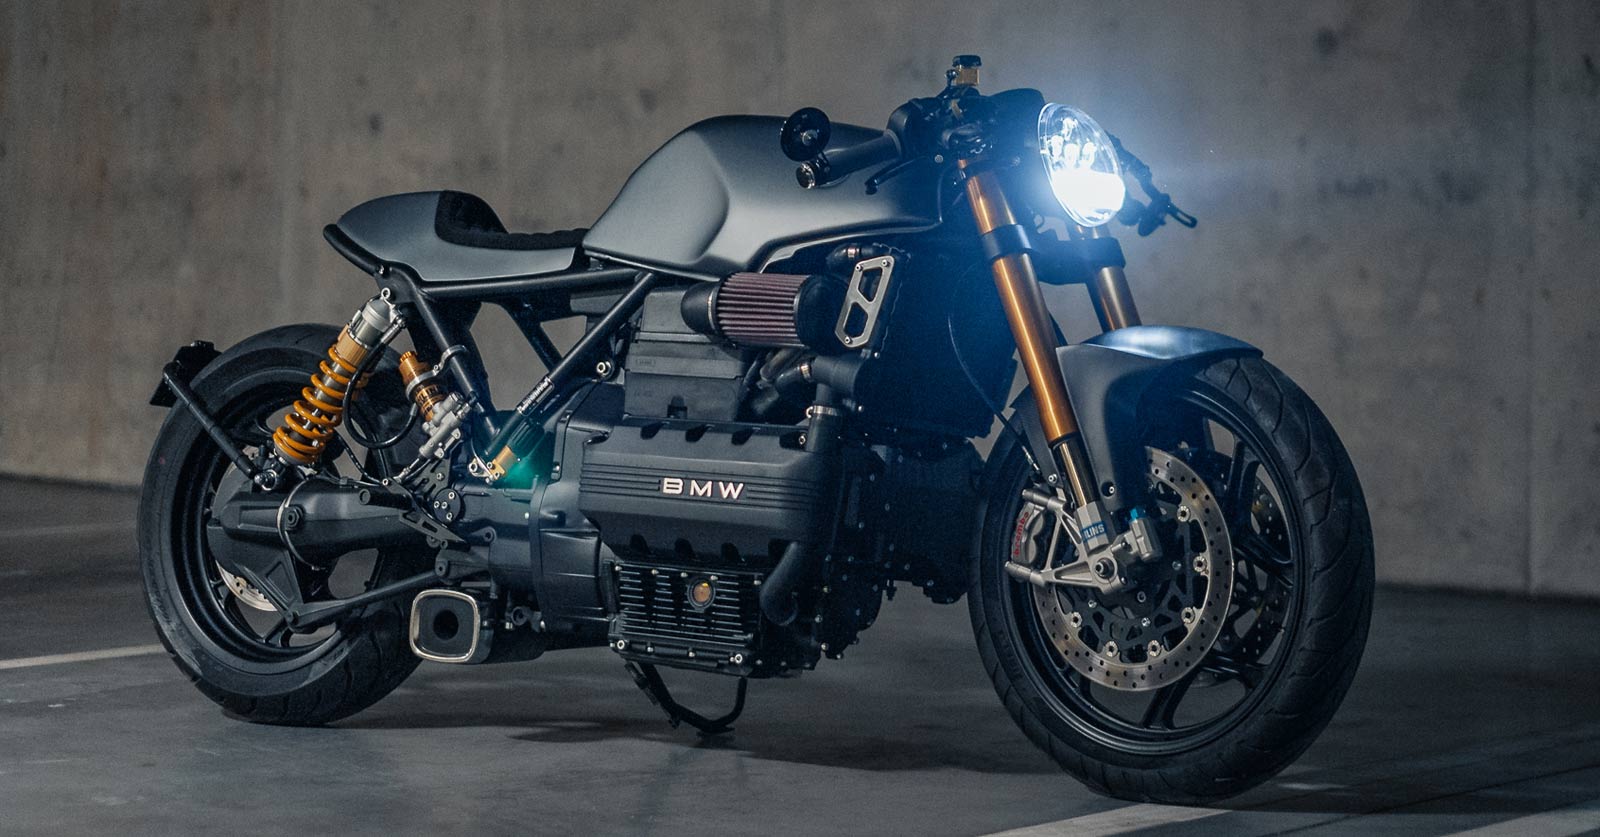 Signing off: Two Wheels Empire’s final BMW K-series build